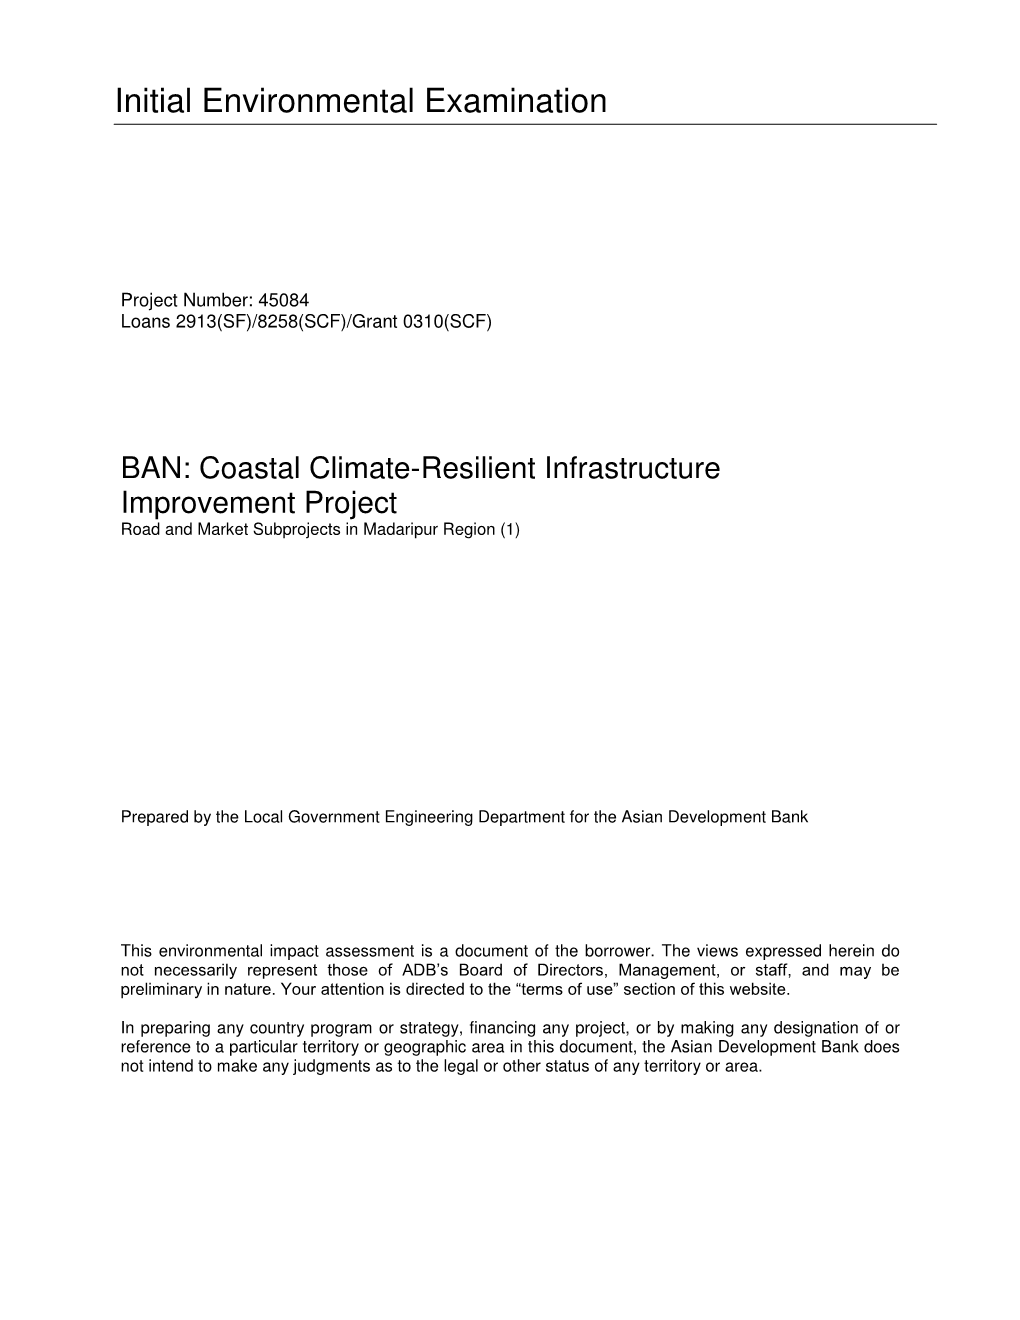 BAN: Coastal Climate-Resilient Infrastructure Improvement Project Road and Market Subprojects in Madaripur Region (1)